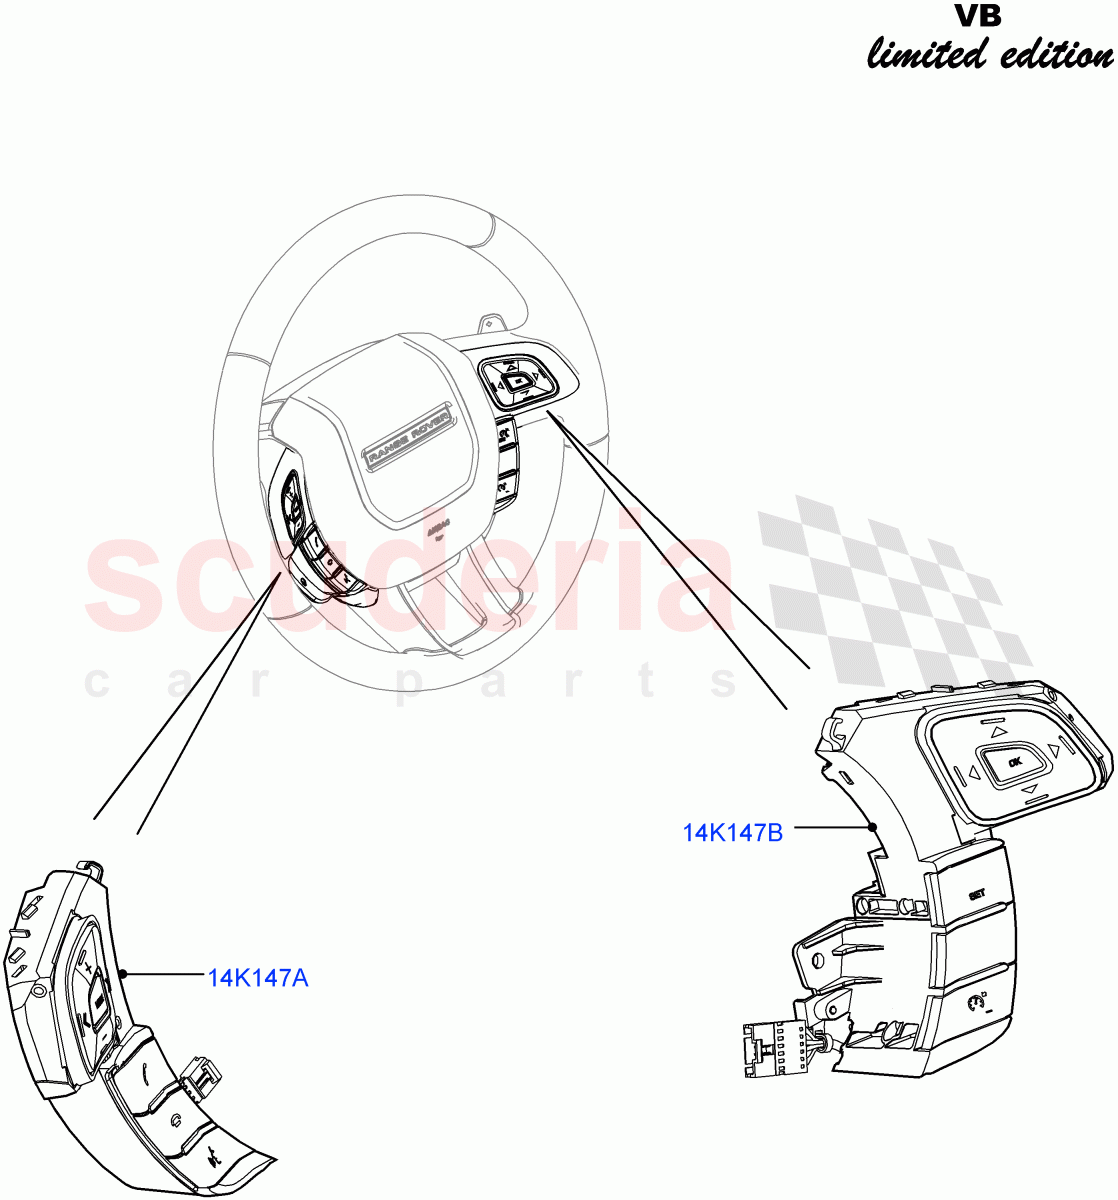 Switches(Steering Wheel)(Victoria Beckham Limited Edition,Halewood (UK)) of Land Rover Land Rover Range Rover Evoque (2012-2018) [2.0 Turbo Petrol GTDI]